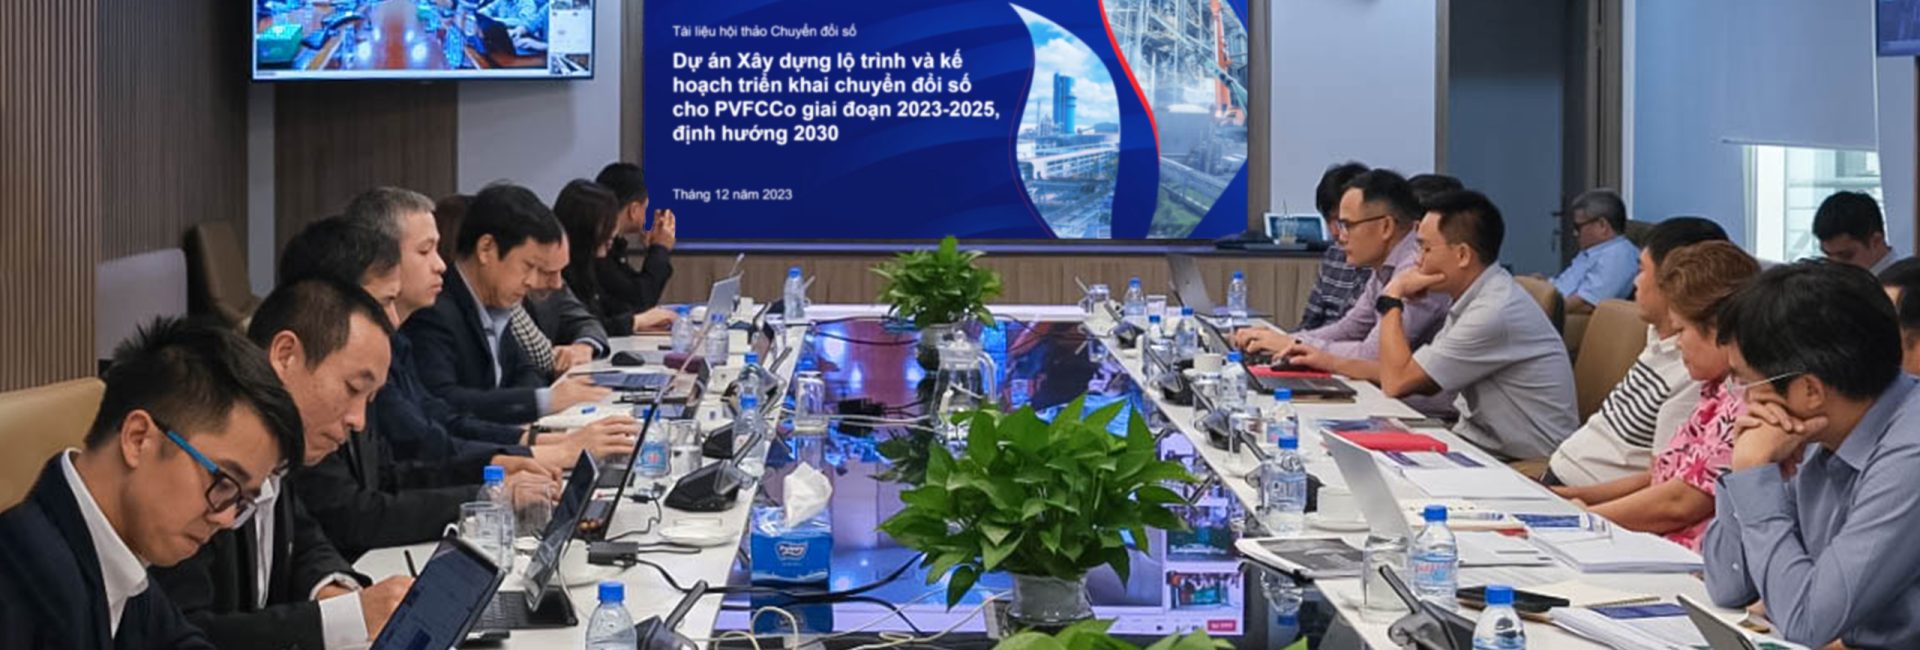 FPT Digital reported on the current status and digital transformation framework at PVFCCo